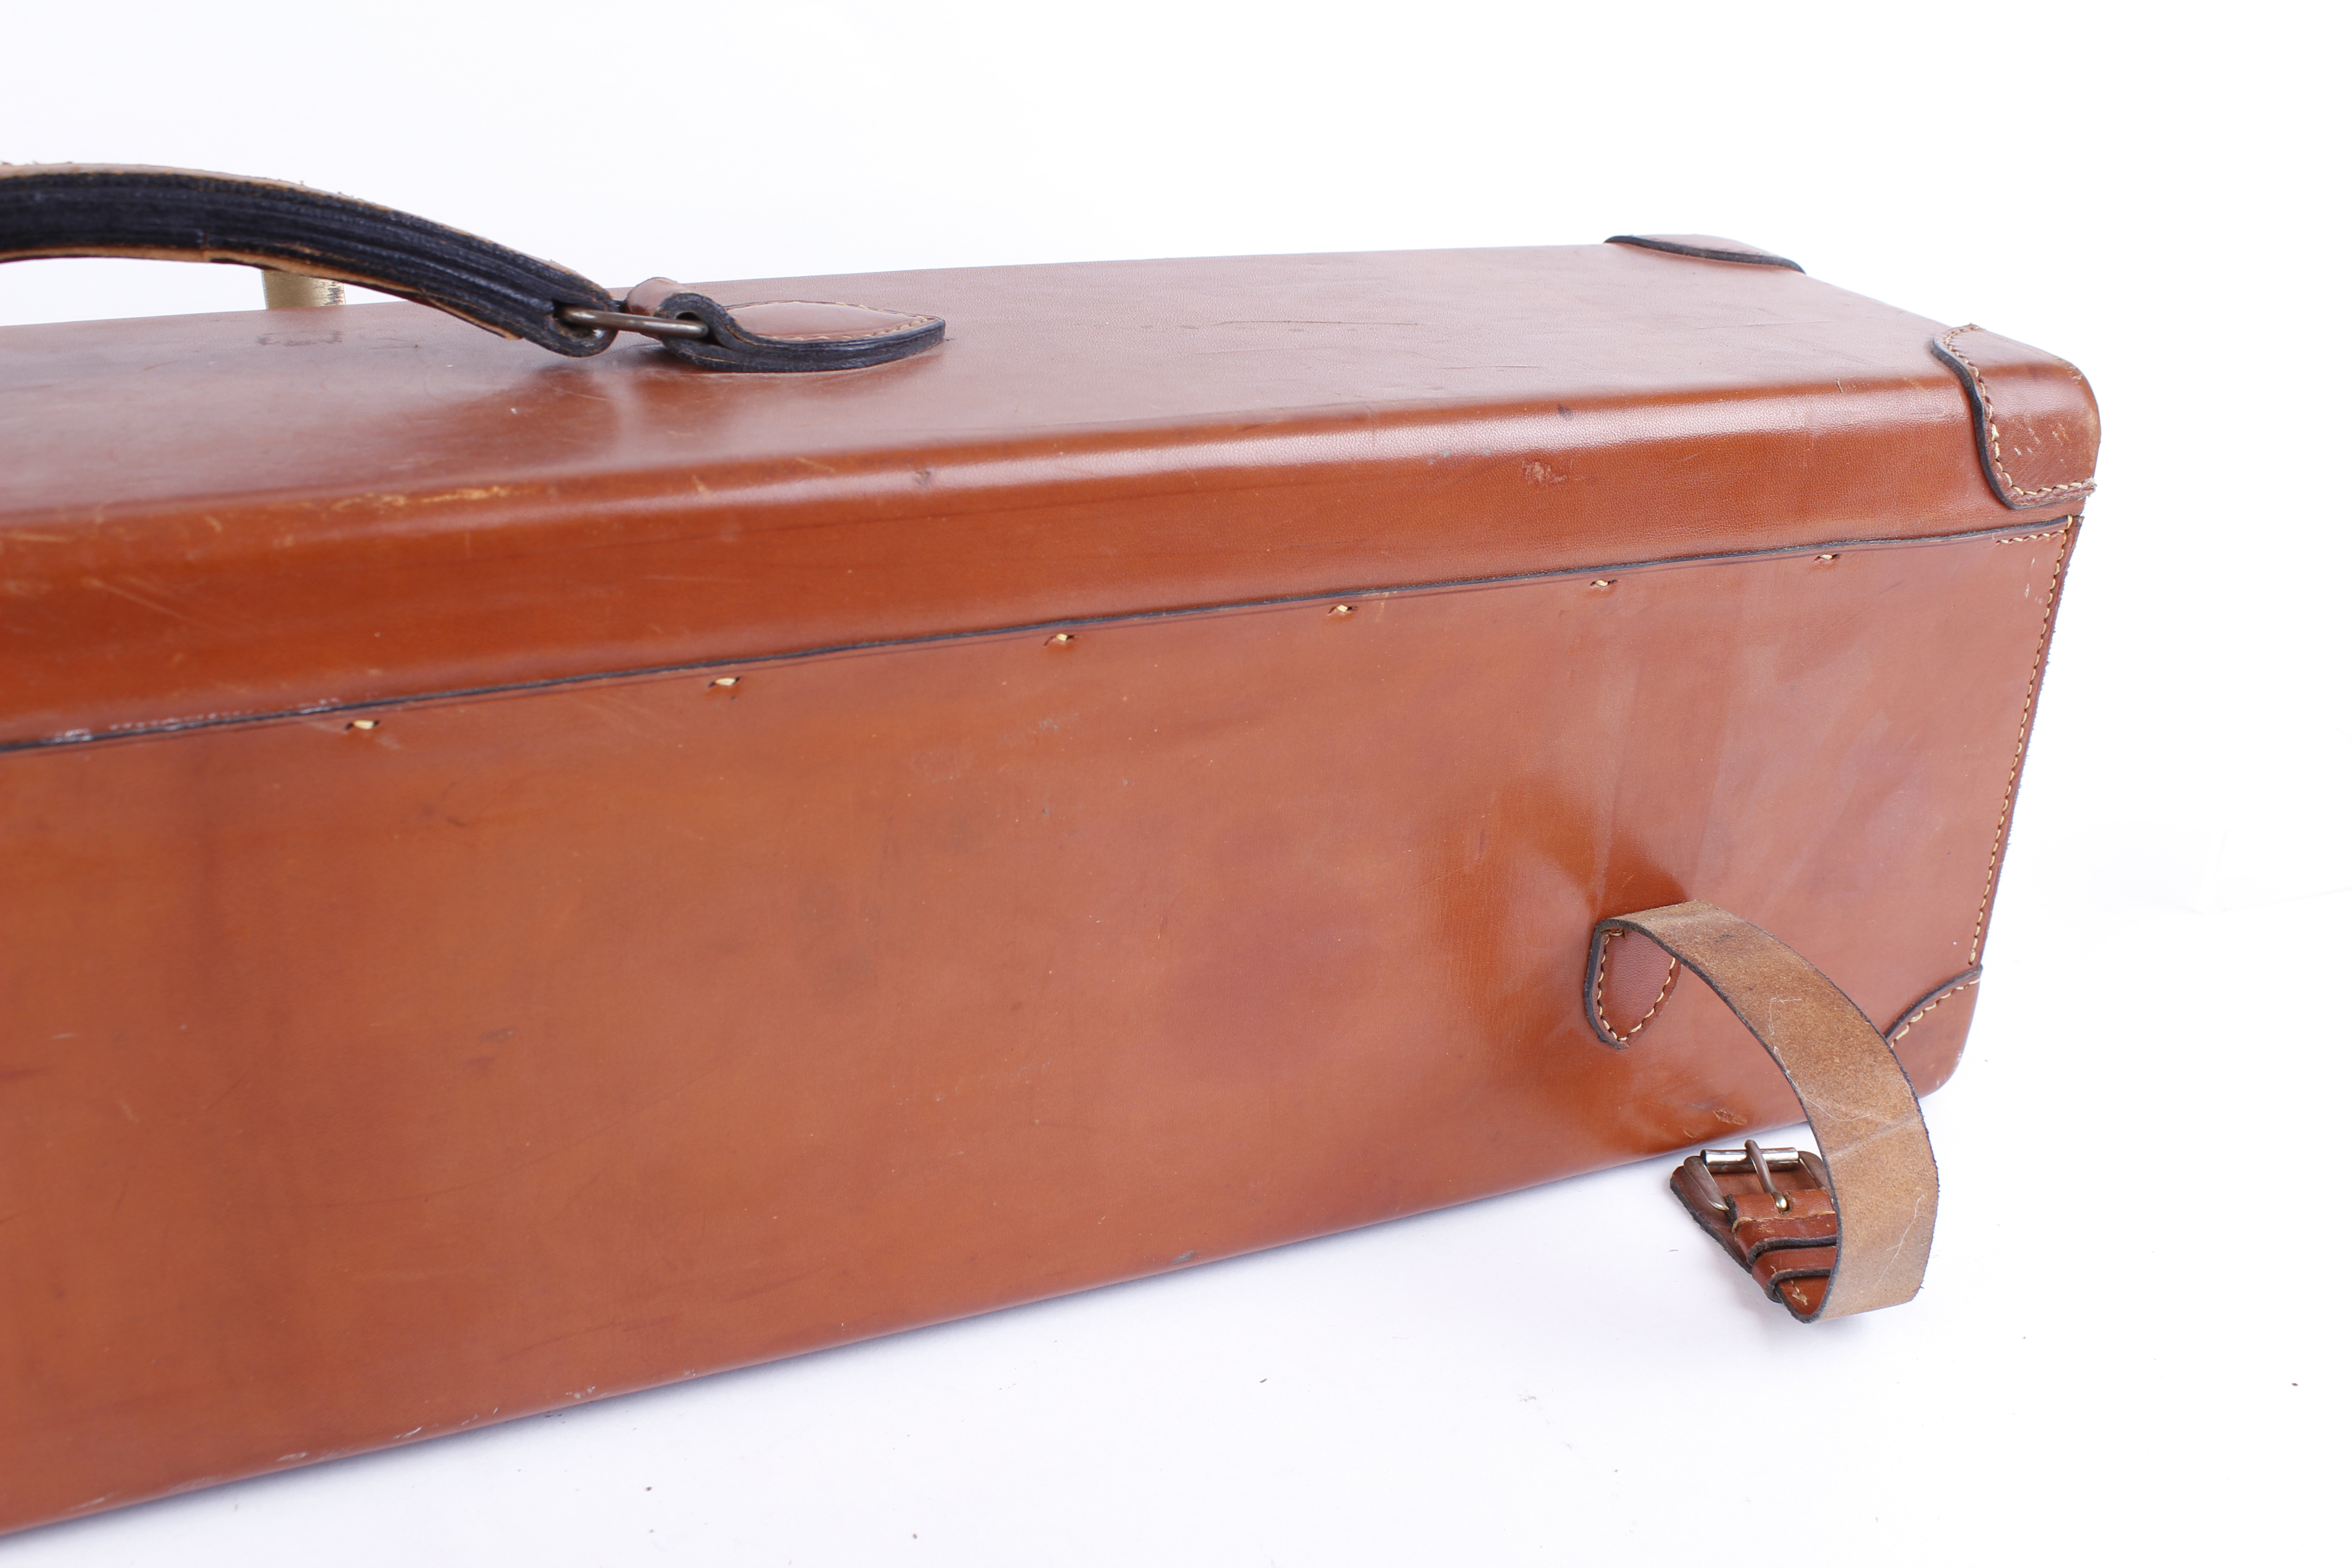 Tan leather double gun case, stitched leather corners, - Image 5 of 7